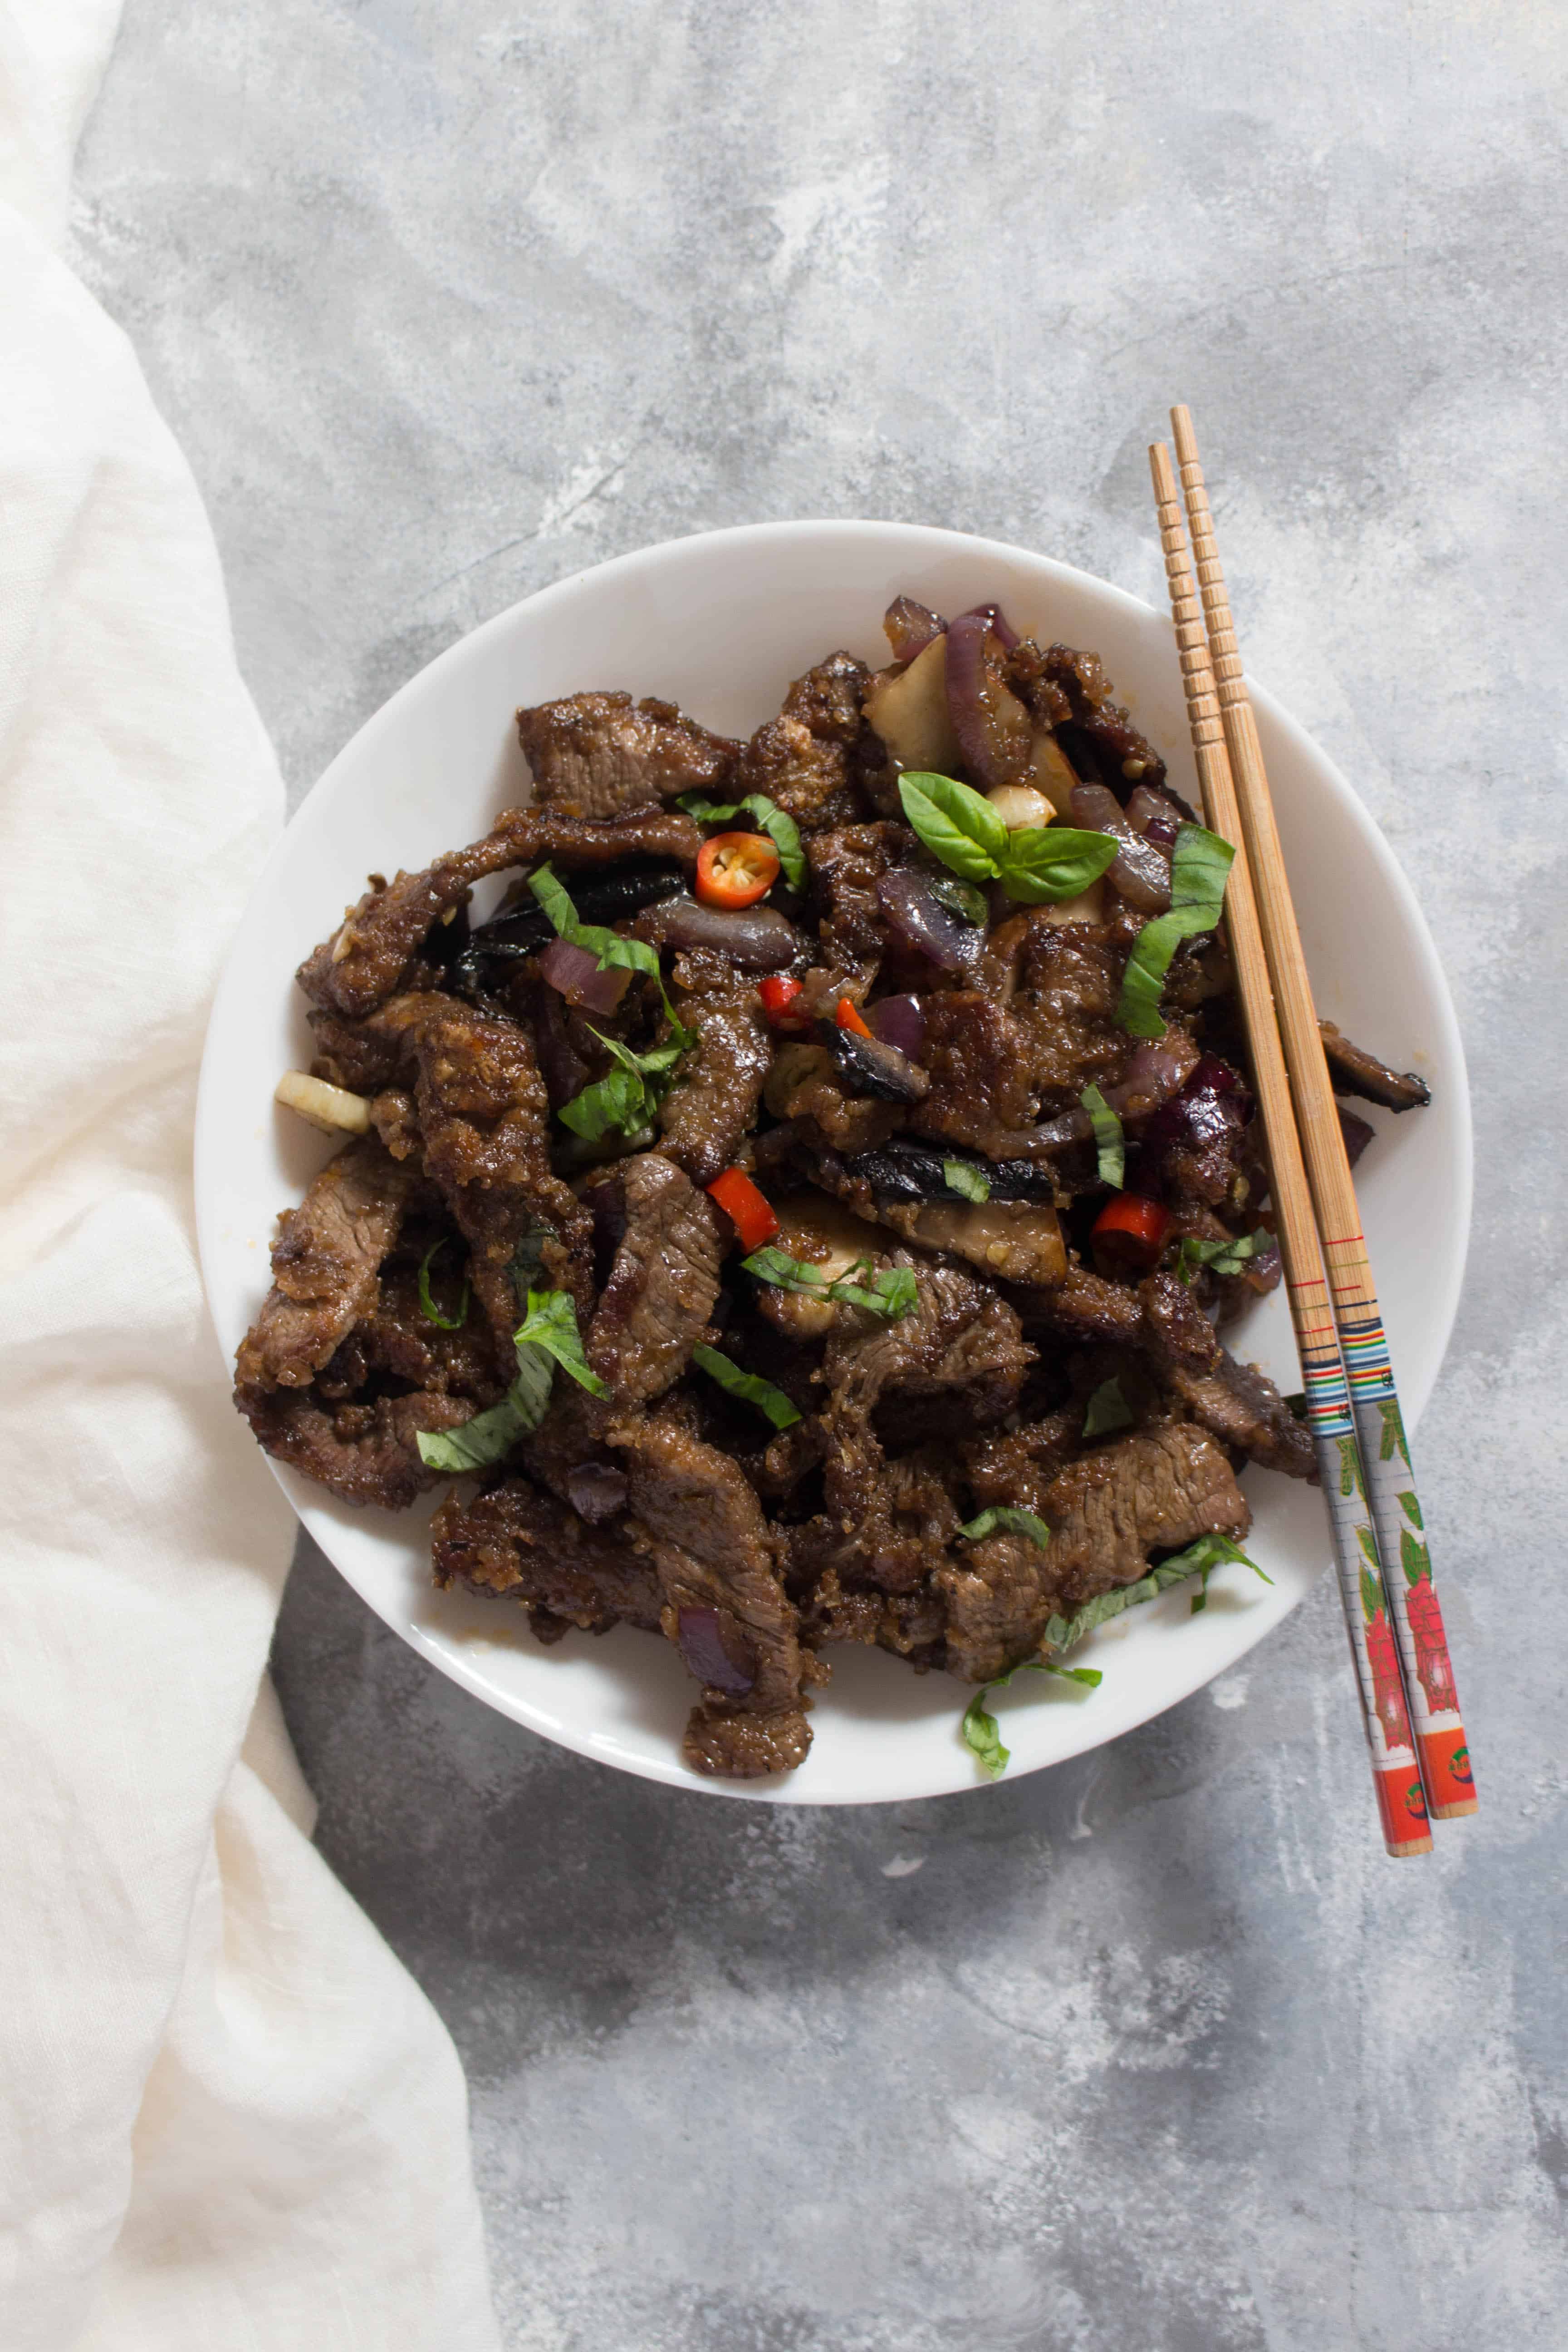 This easy thai beef stir fry meal prep takes less than 45 minutes to put together - perfect as a quick meal prep or a busy weeknight dinner. 